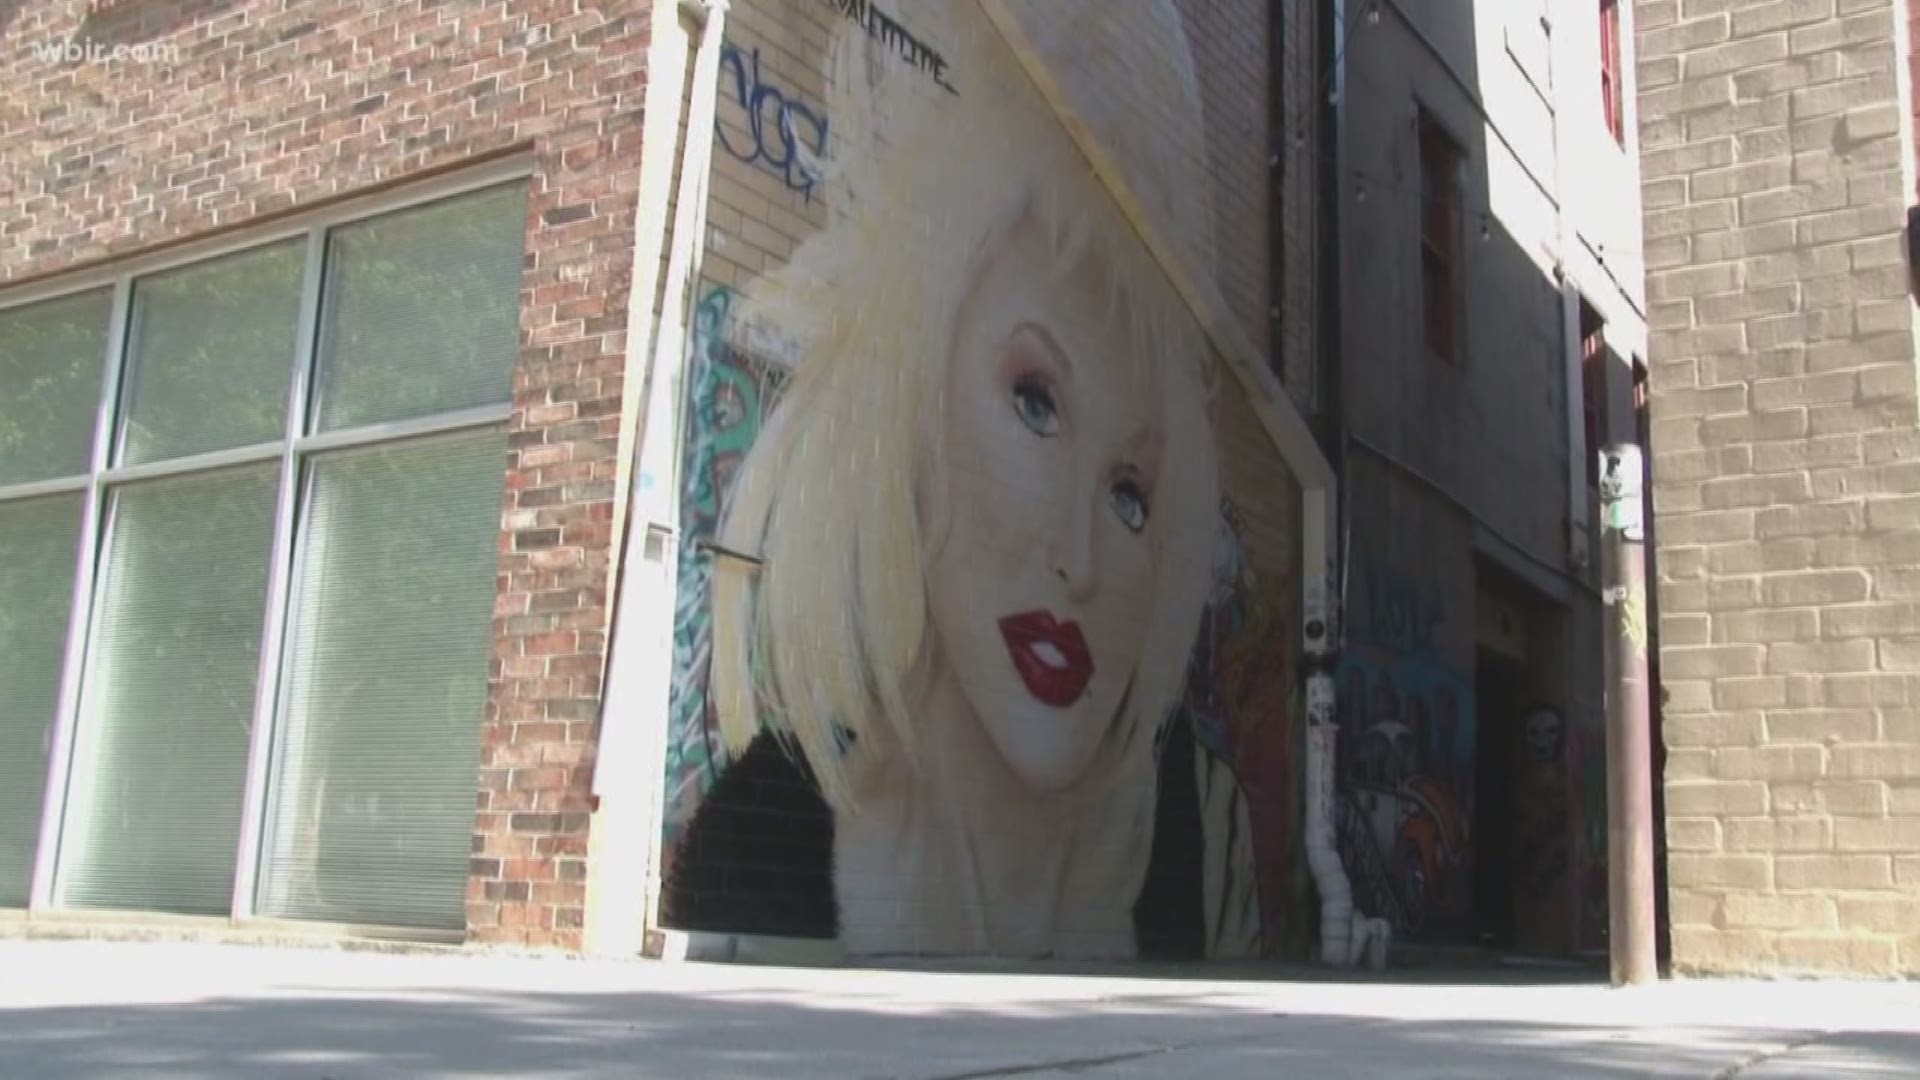 An artist worked 9 to 5 recently to light up Downtown Knoxville with a new mural featuring Sevierville's favorite daughter!